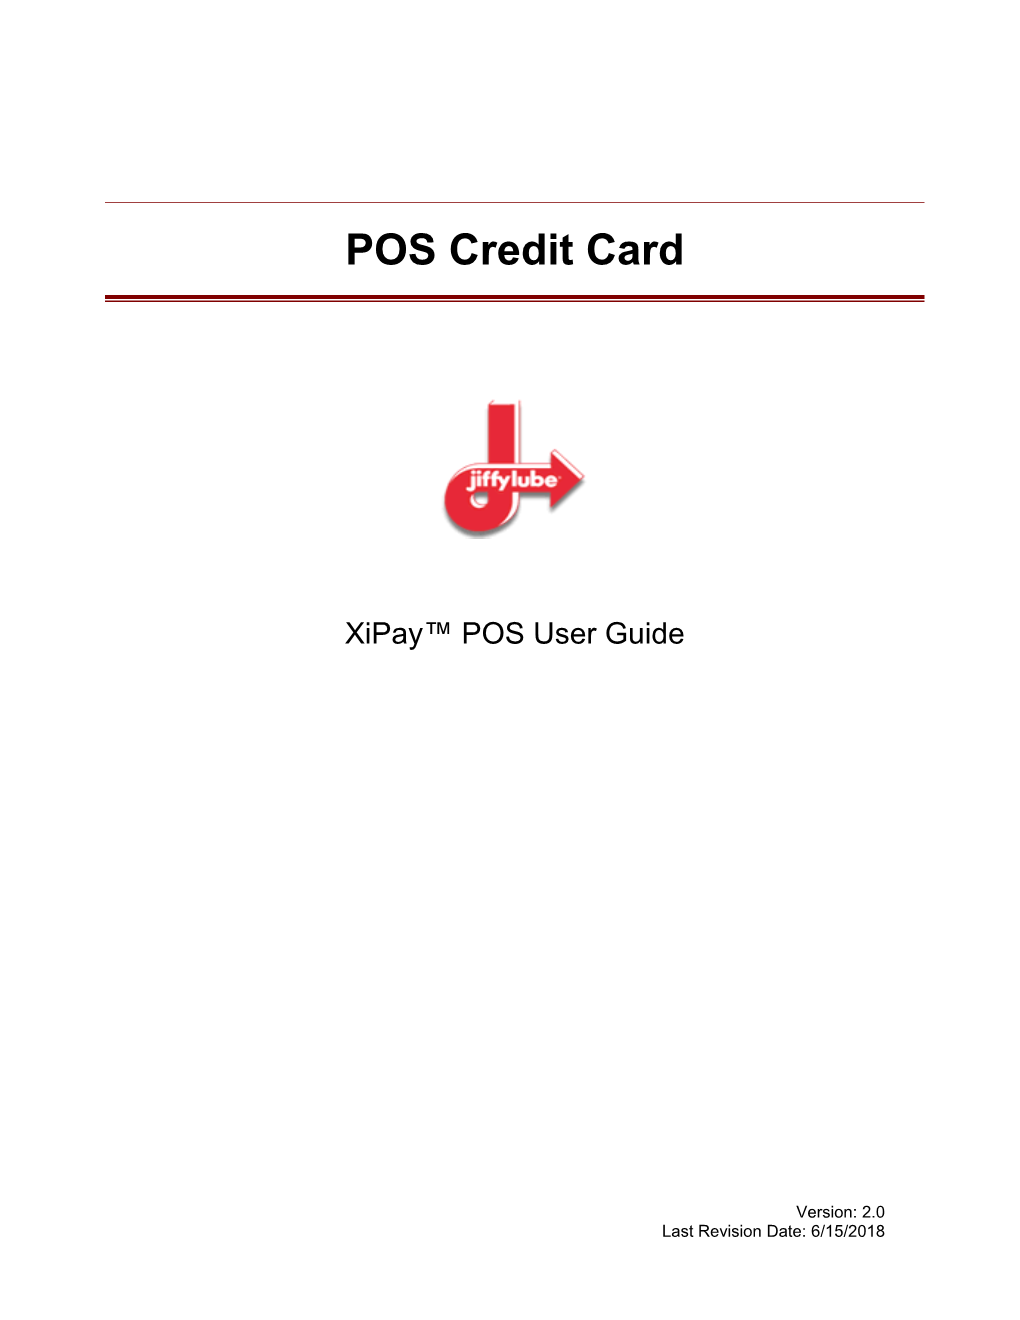 Xipay POS User Guide